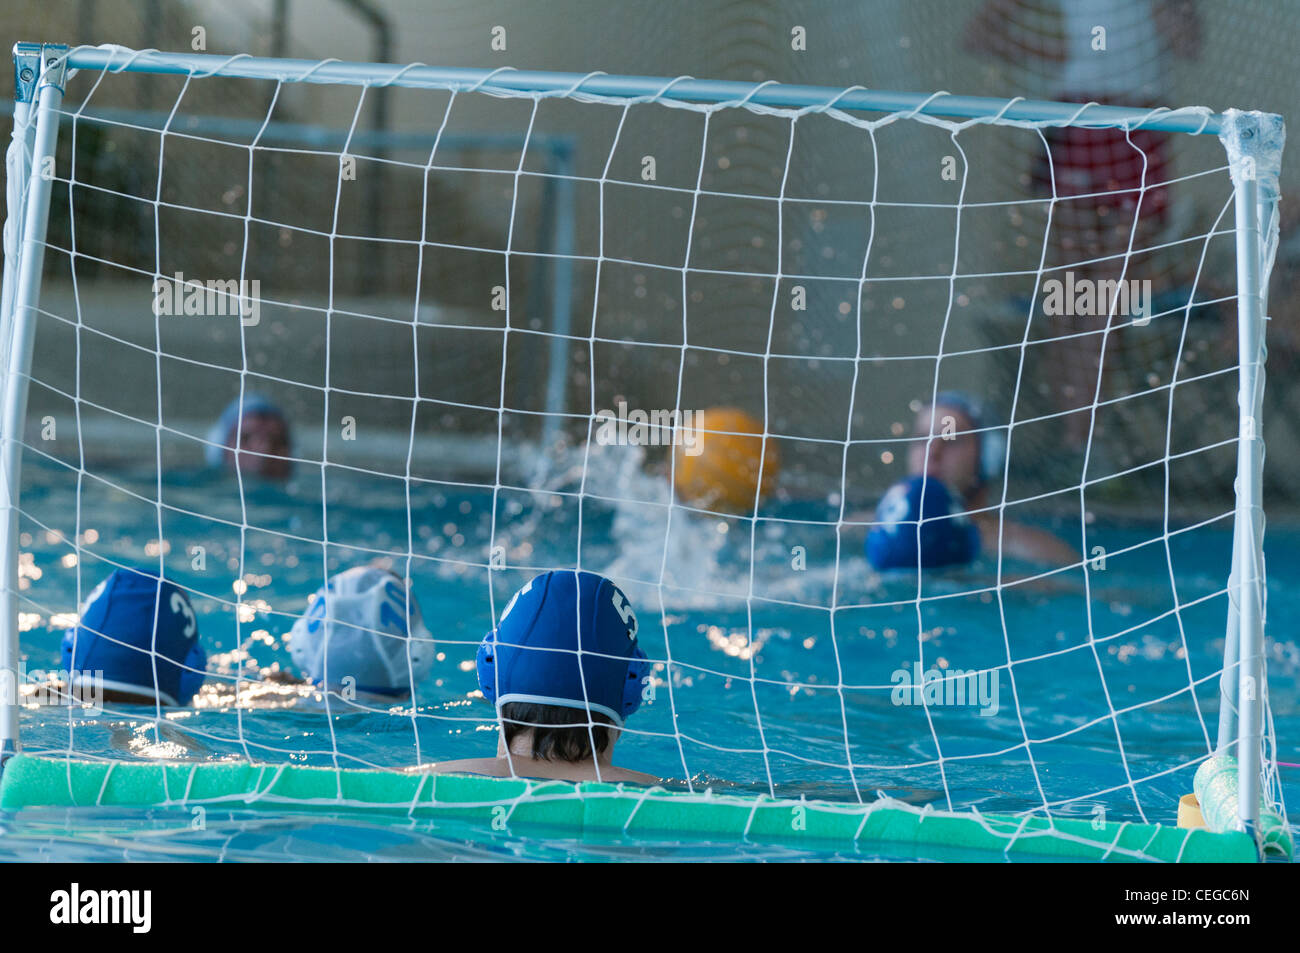 Amateur waterpolo match at the local swimming pool Stock Photo